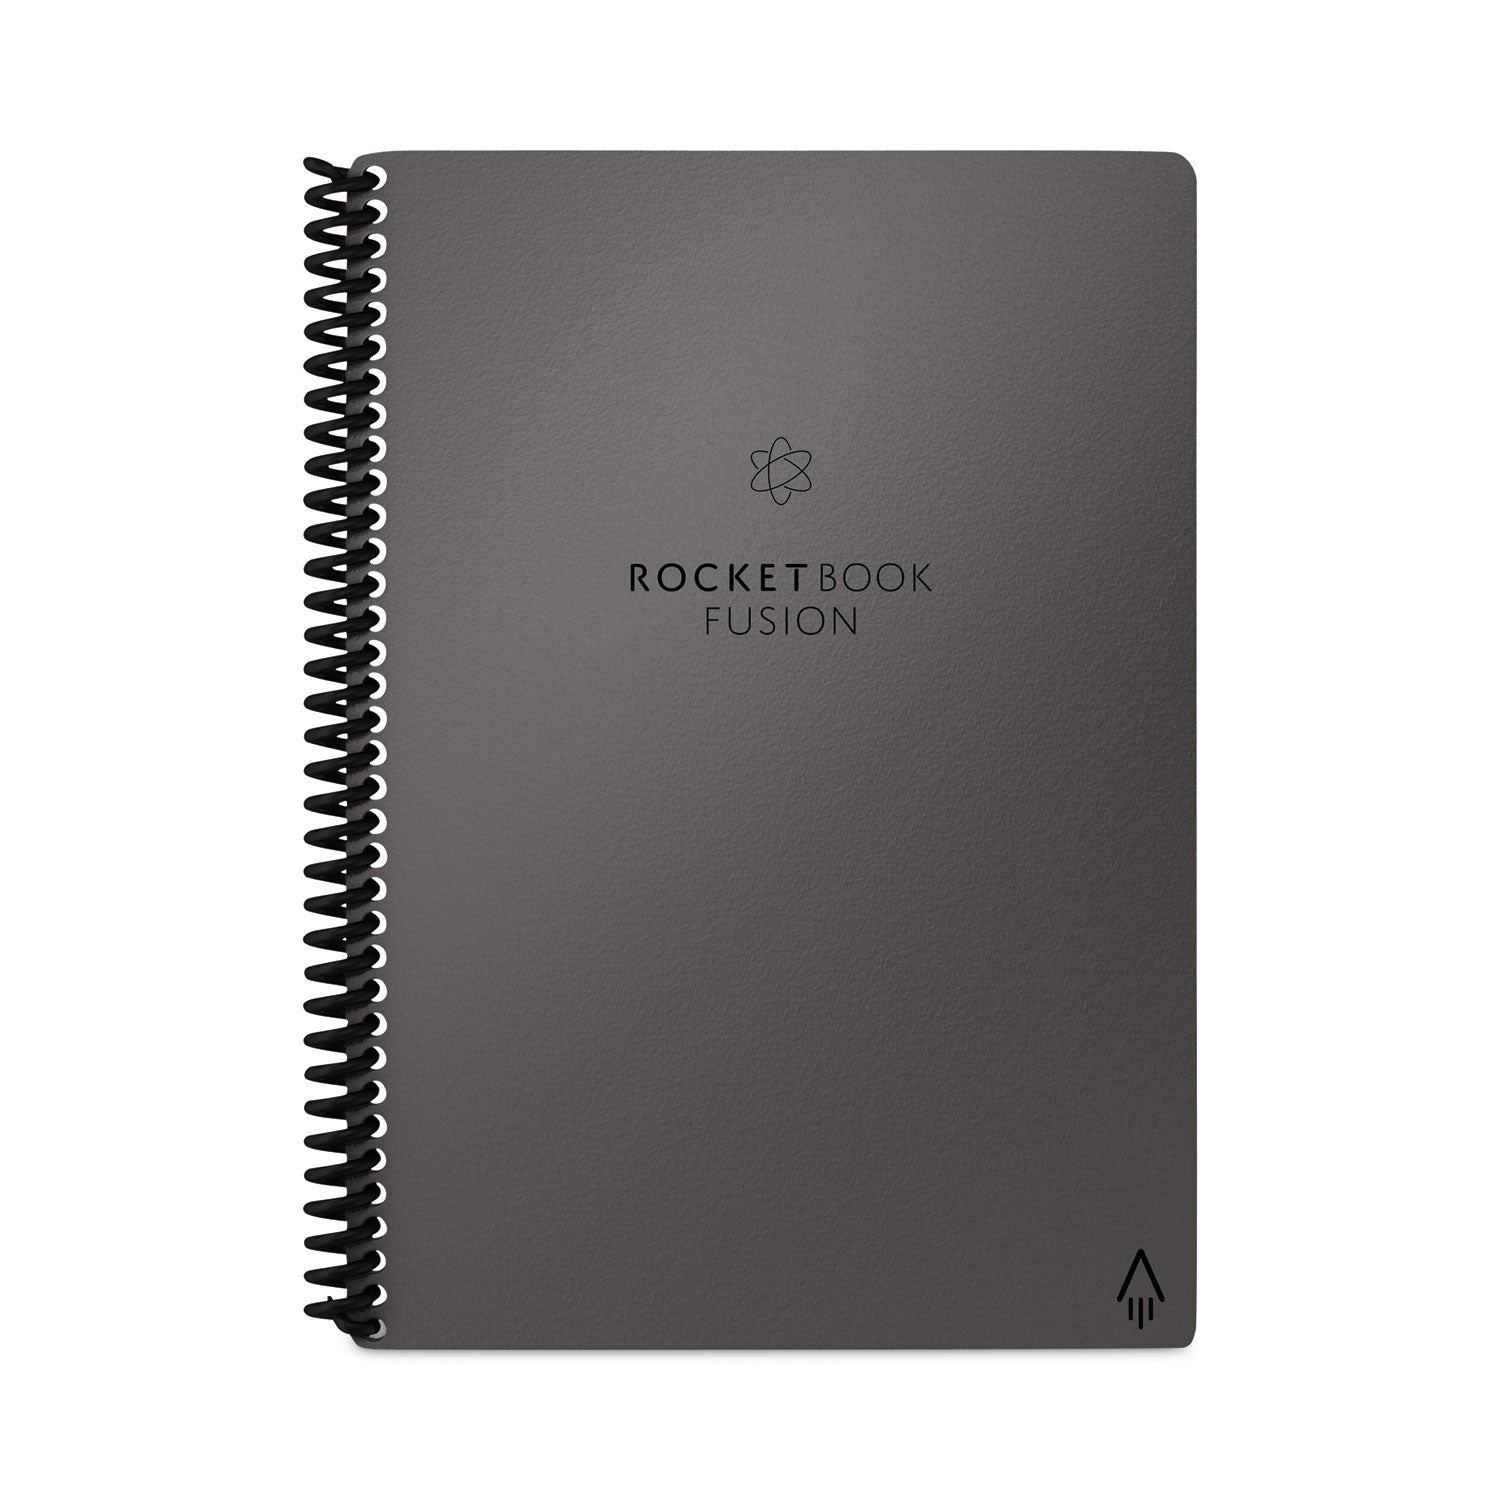 fusion-smart-notebook-seven-assorted-page-formats-gray-cover-21-88-x-6-sheets_rkbevrferccigfr - 2